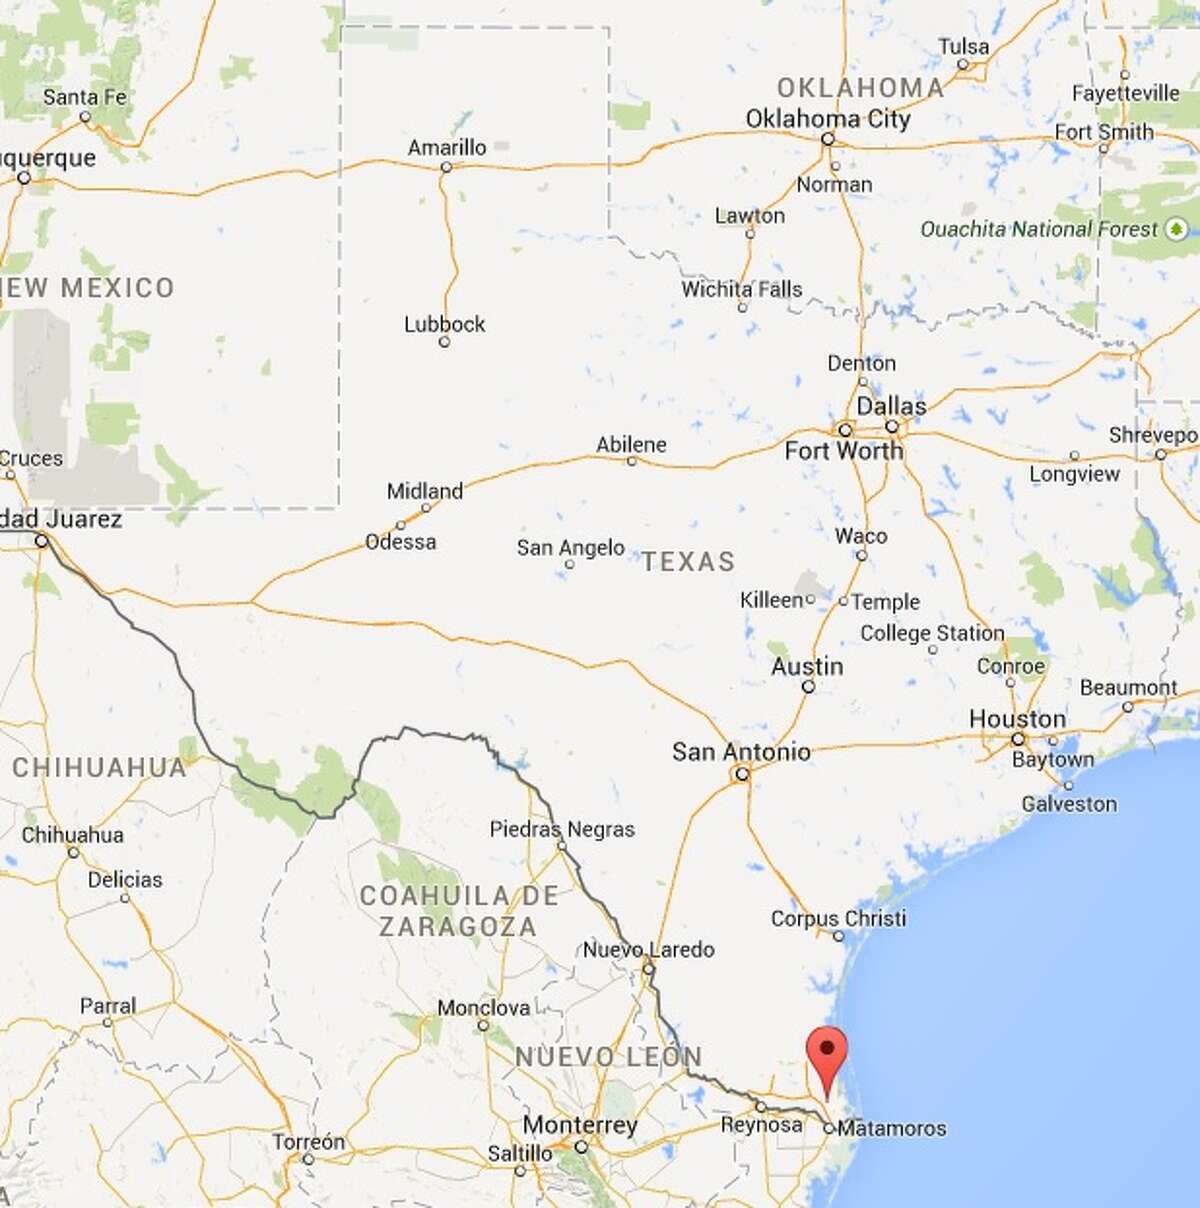 Cameron County is the southernmost county in Texas.